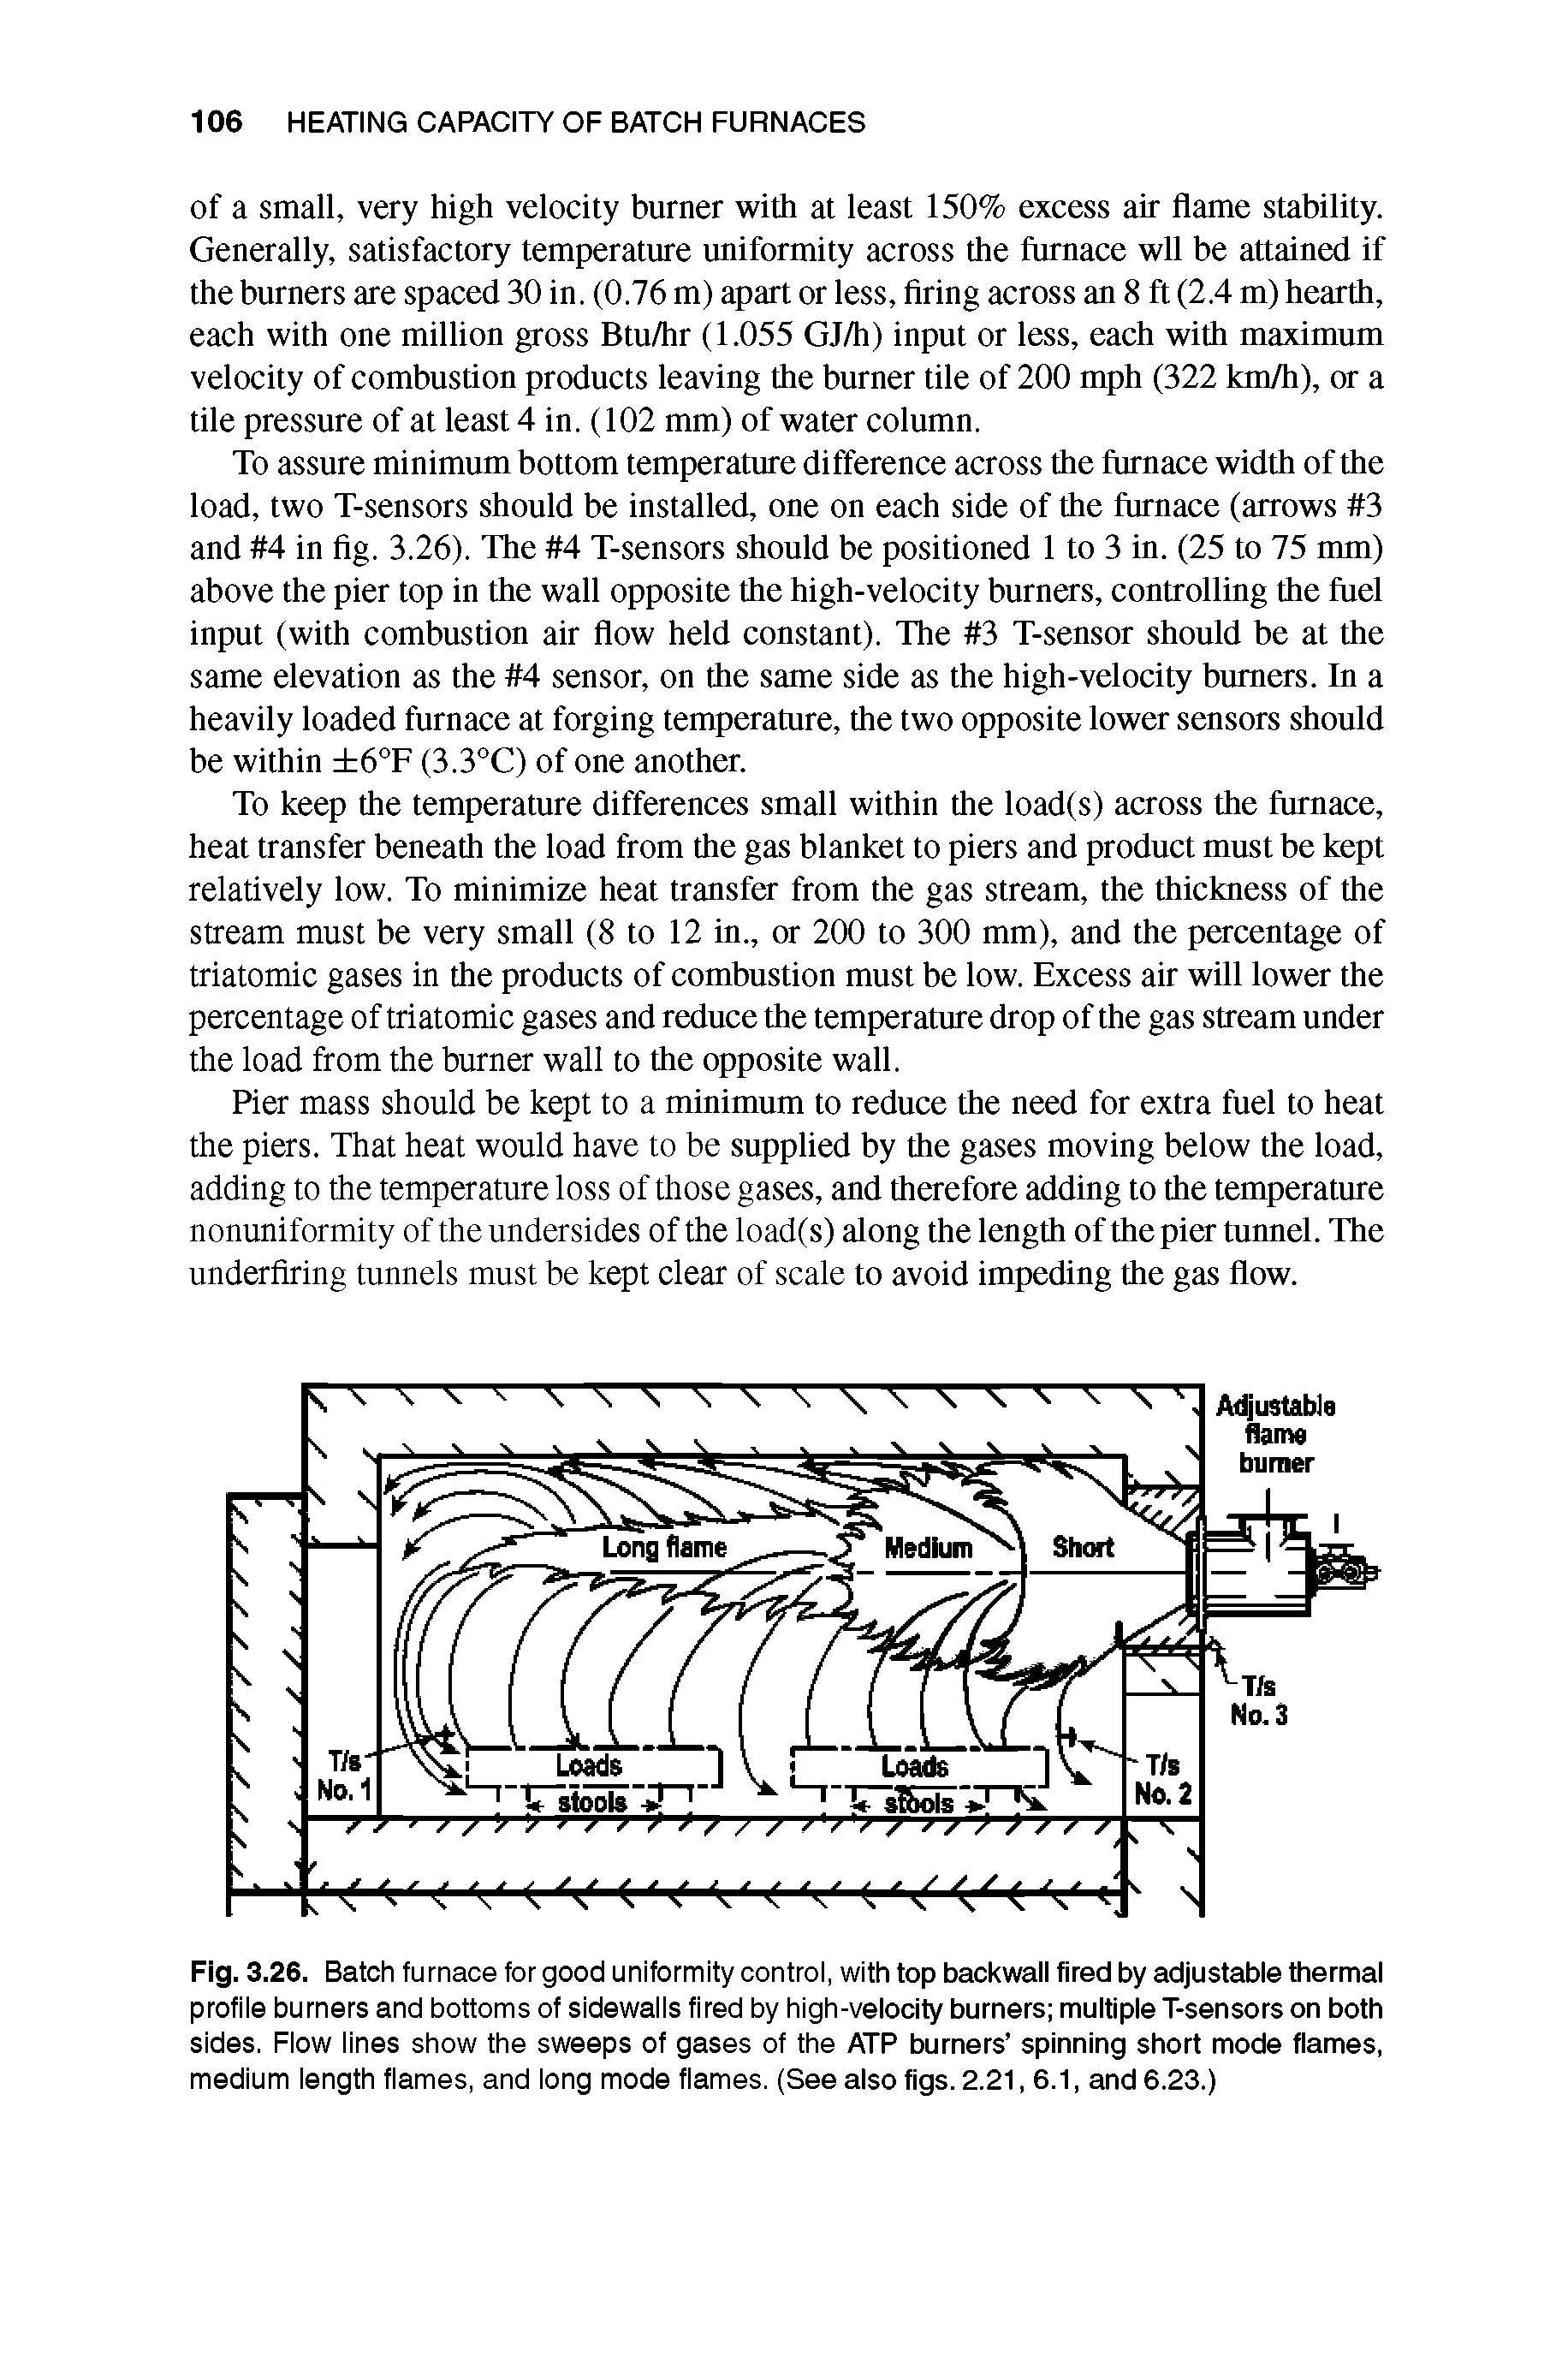 Fig. 3.26. Batch fu rnace for good uniformity control, with top backwall fired by adjustable thermal profile burners and bottoms of sidewalls fired by hlgh-velodty burners multiple T-sensors on both sides. Flow lines show the sweeps of gases of the ATP burners spinning short mode flames, medium length flames, and long mode flames. (See also figs. 2.21,6.1, and 6.23.)...